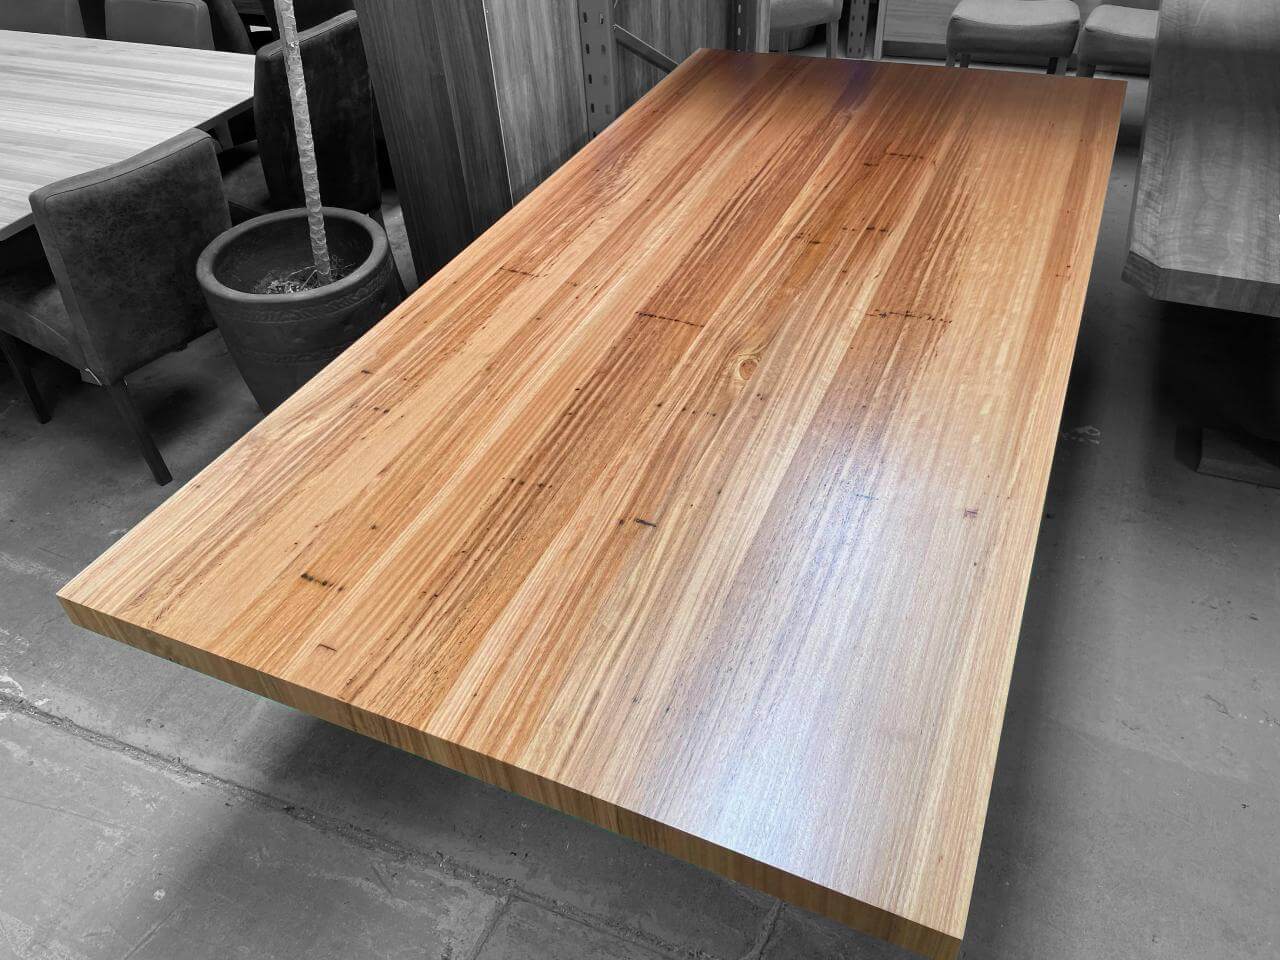 KT 8 Seater Dining Table Blackbutt Timber 2 Pack Polyurethane Quality Furniture Made in Adelaide, South Australia